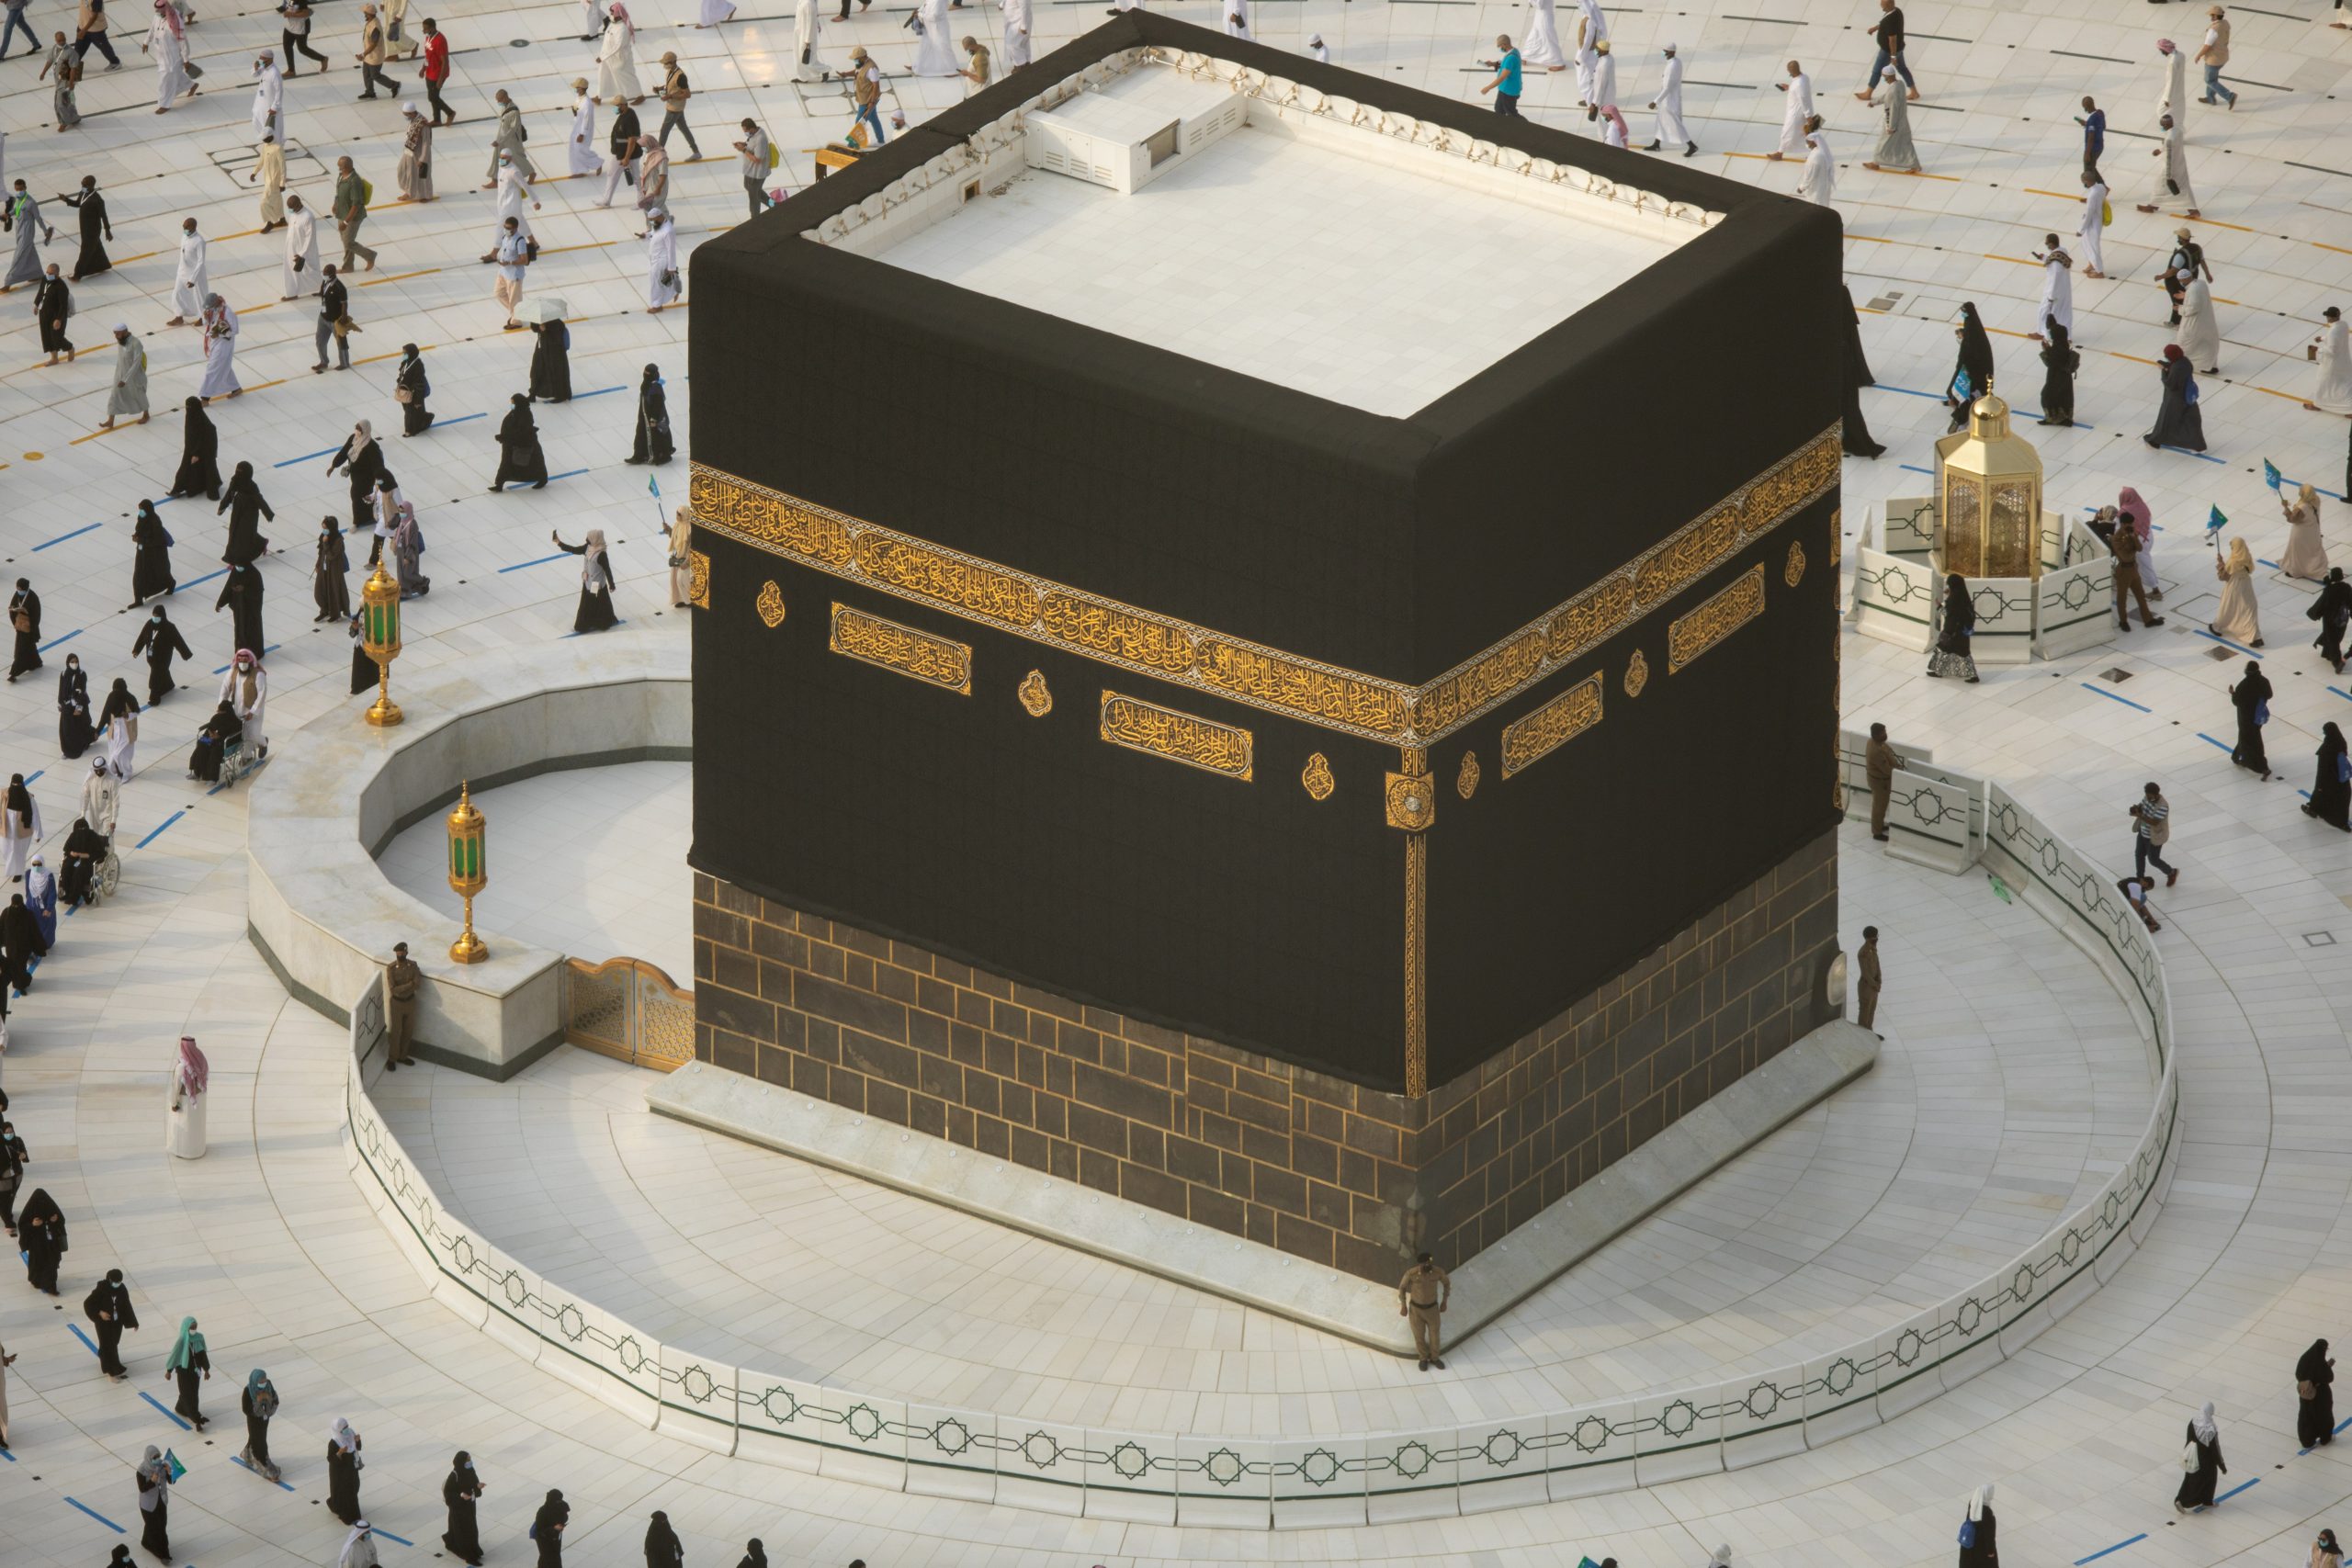 Overseas pilgrims to be allowed to perform this year’s hajj